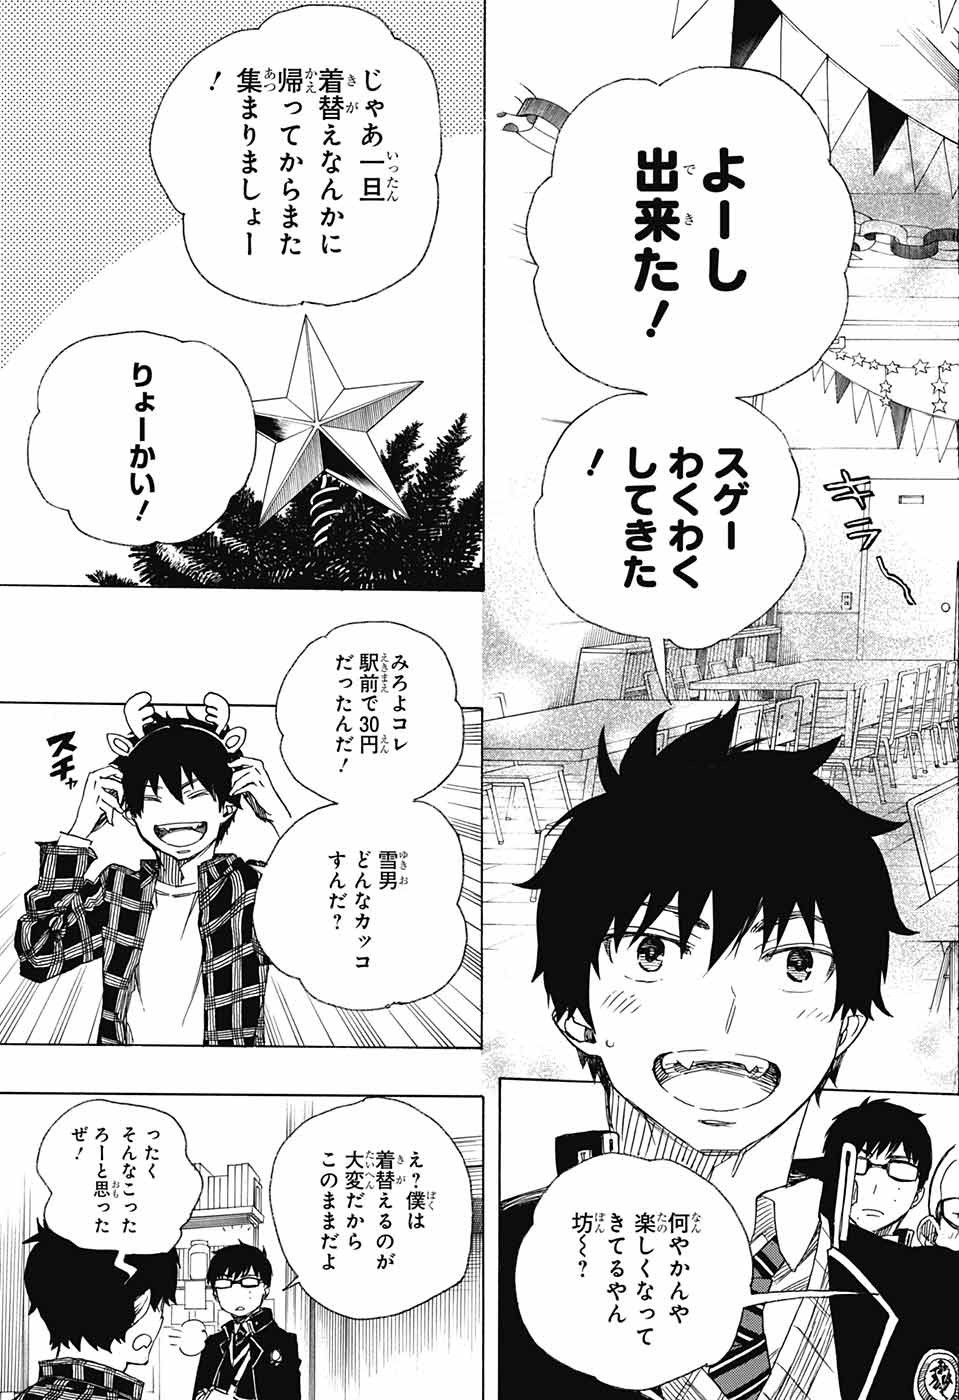 Ao no Exorcist - Chapter 89 - Page 5